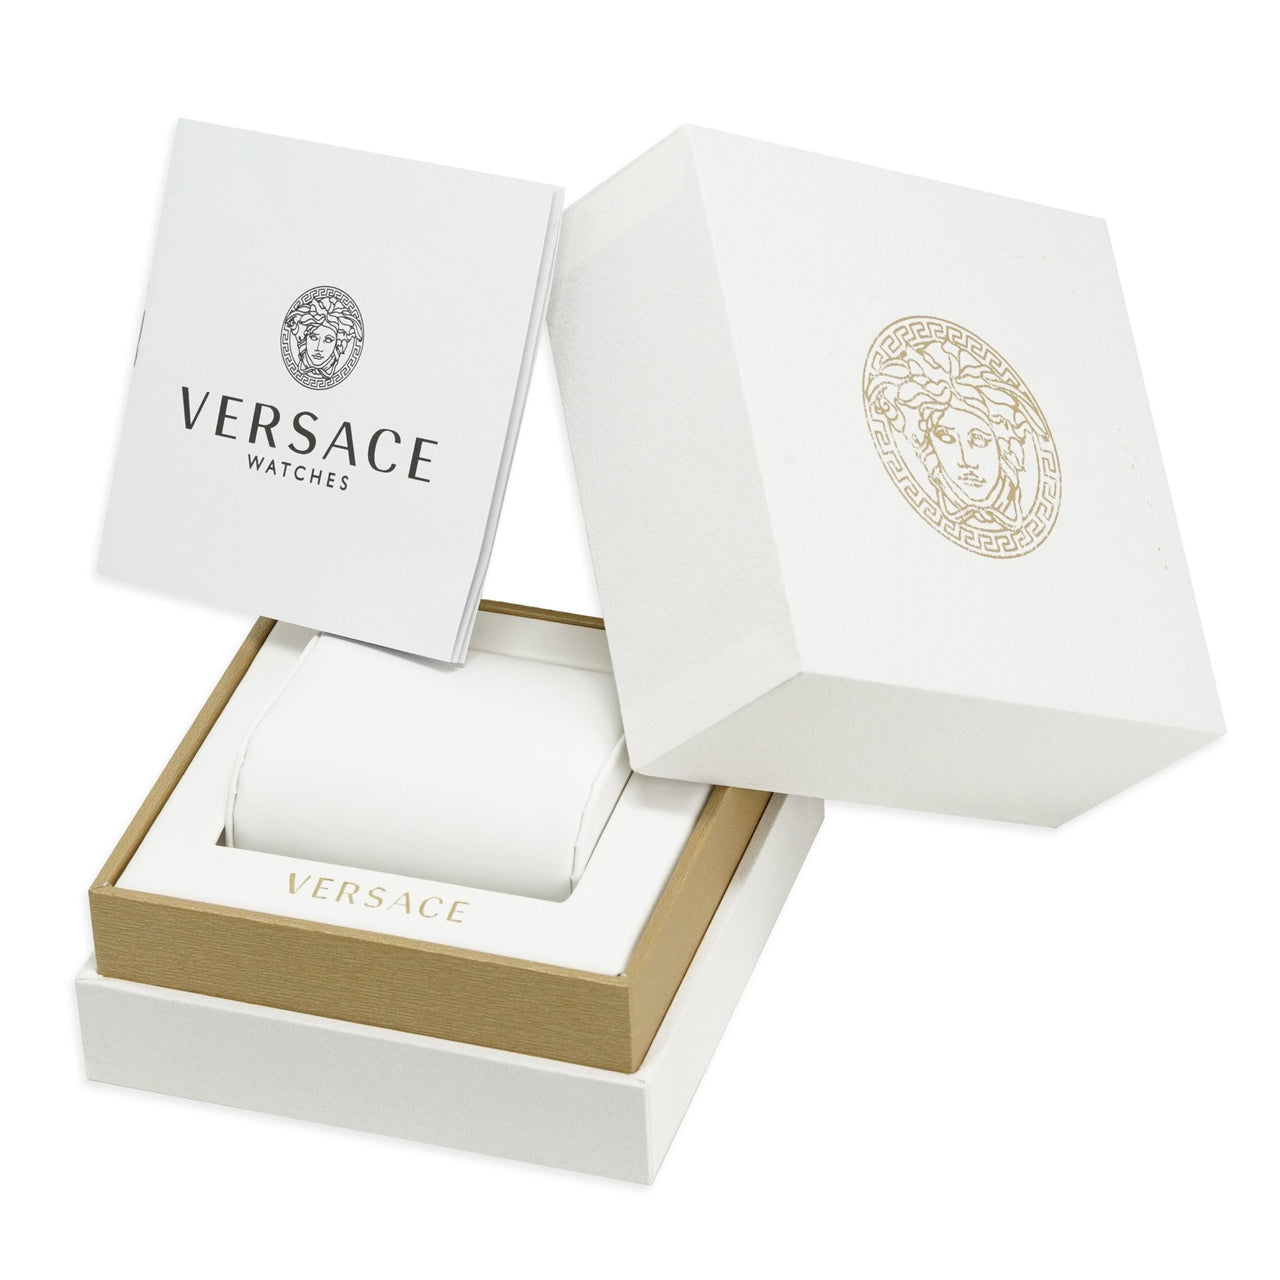 Versace Men's Watch Hellenyium GMT Two-Tone Blue V11060017 - Watches & Crystals